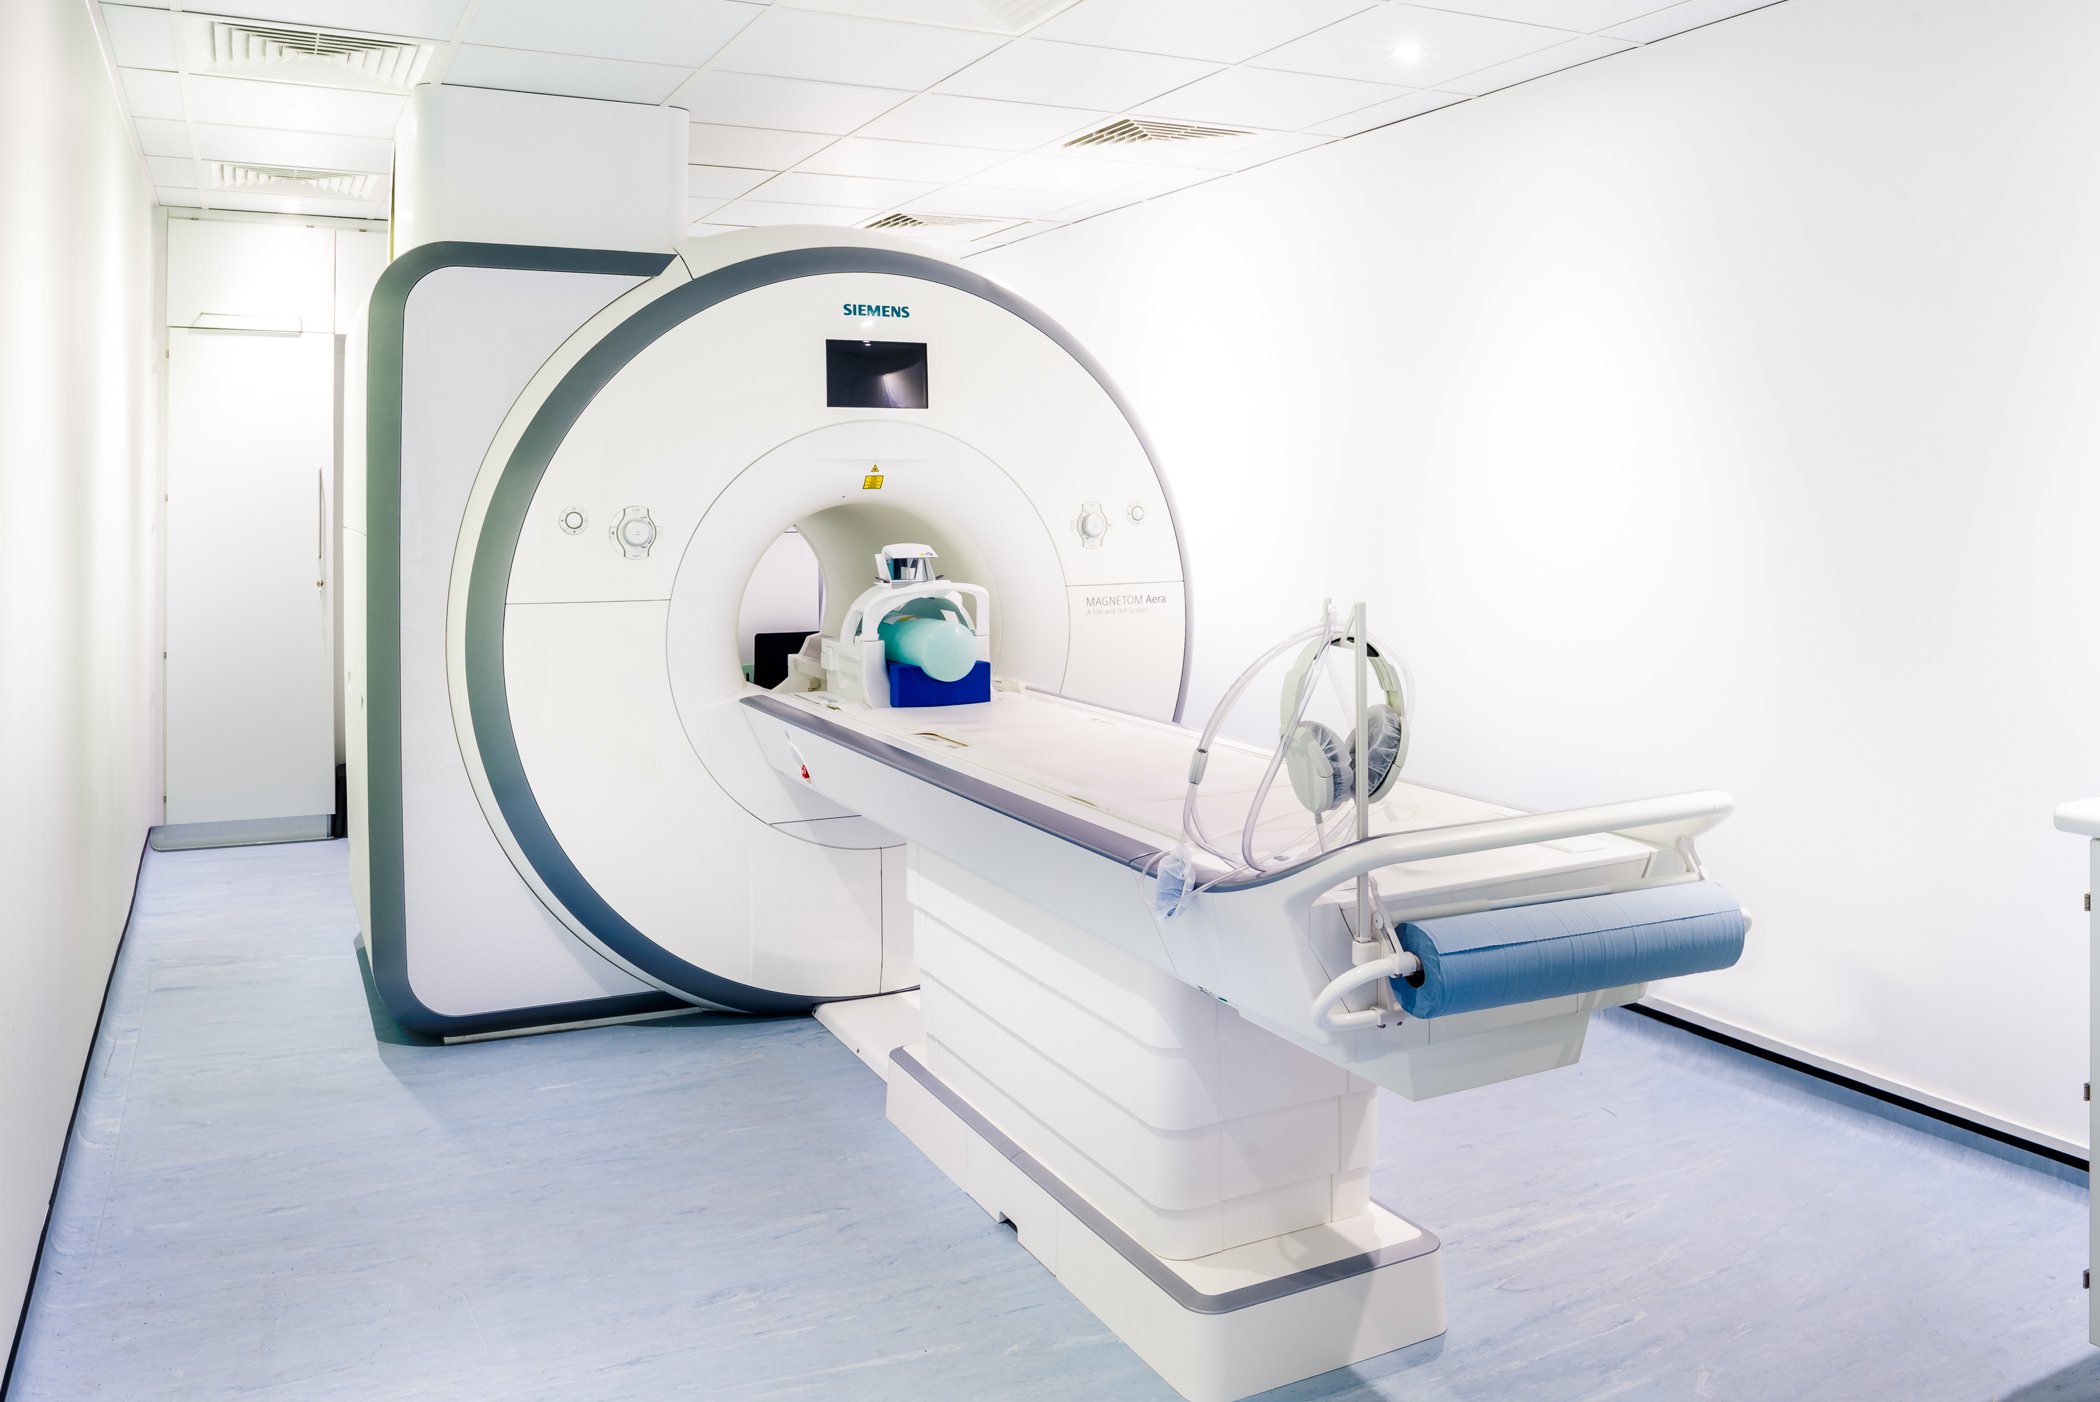 New Scanner will enable better access for patients featured image